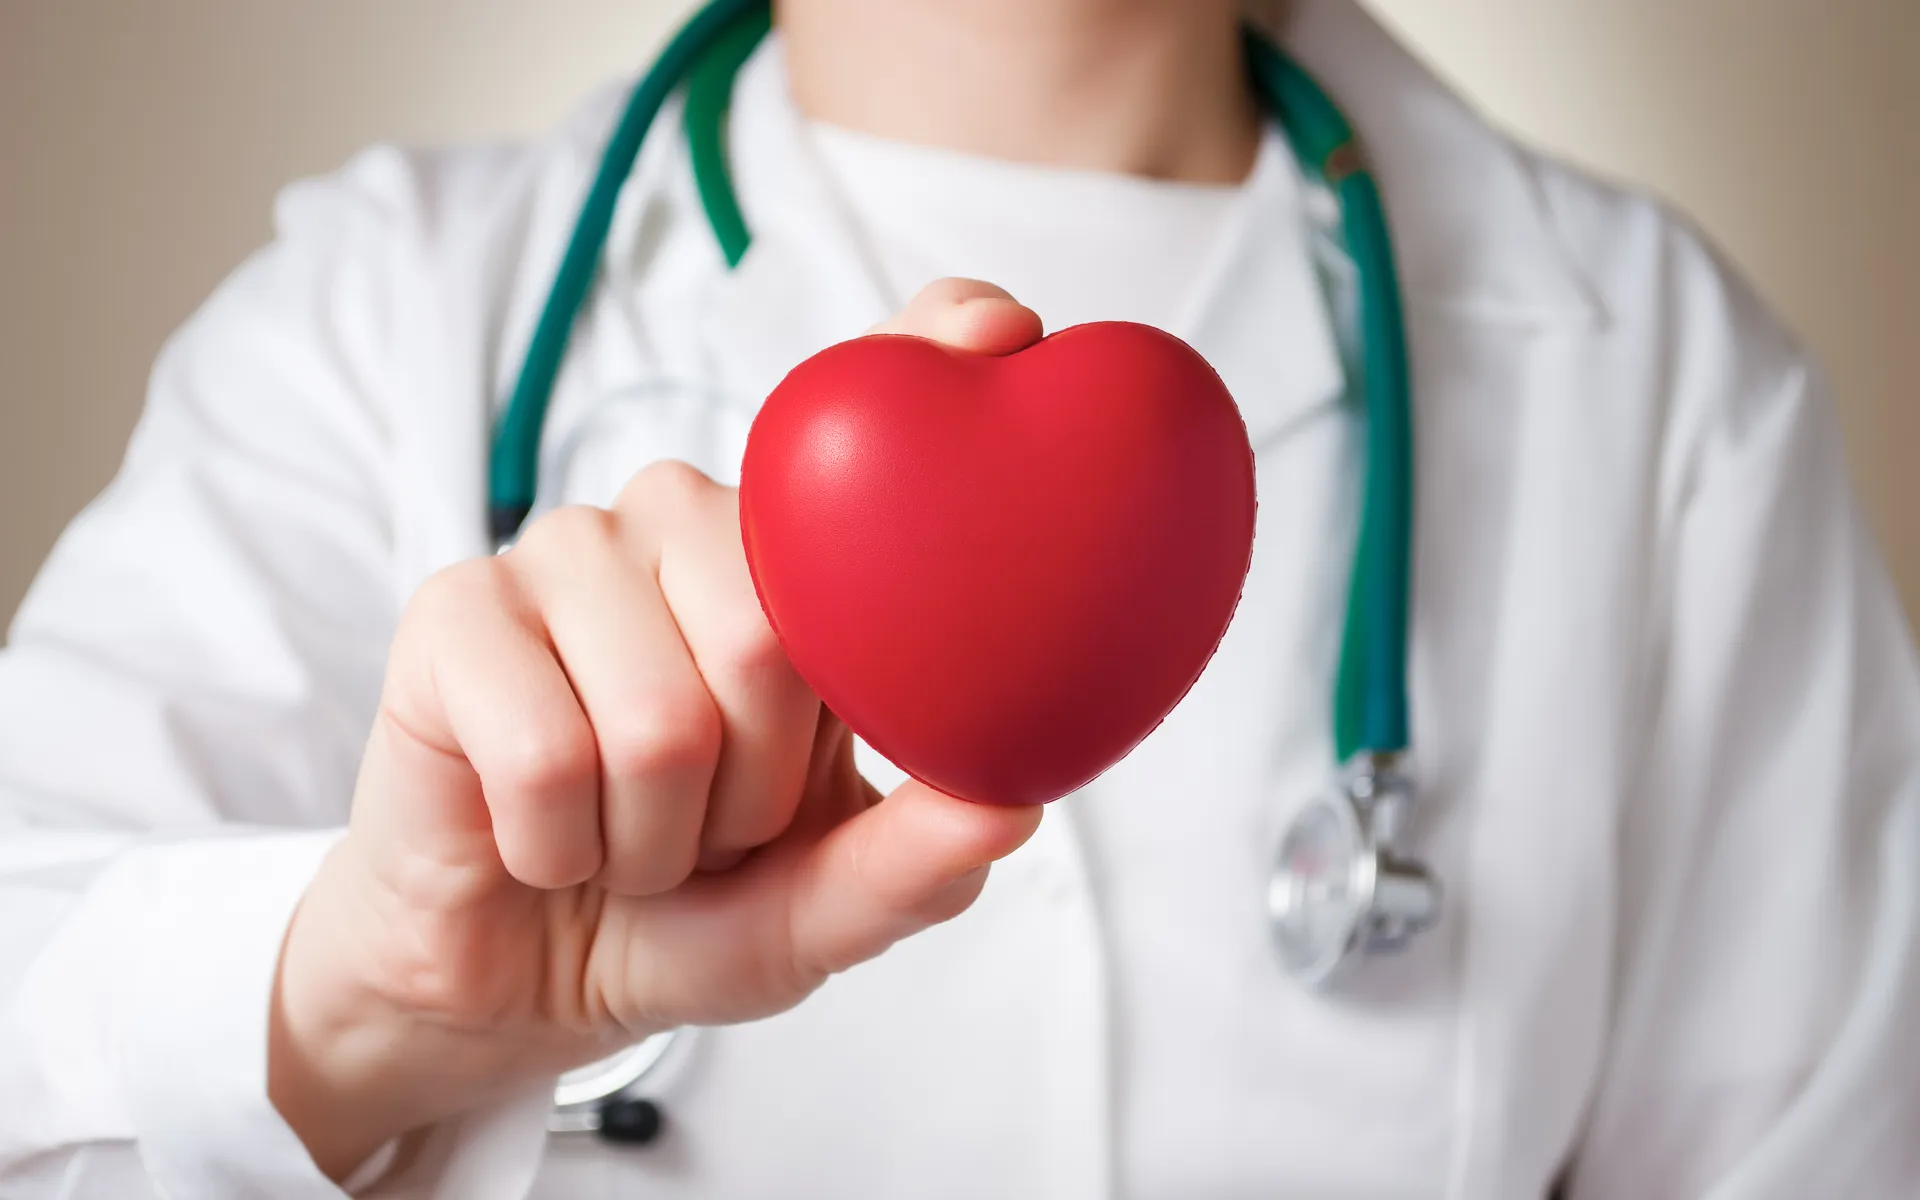 15 Things You Didn’t Know About Your Heart